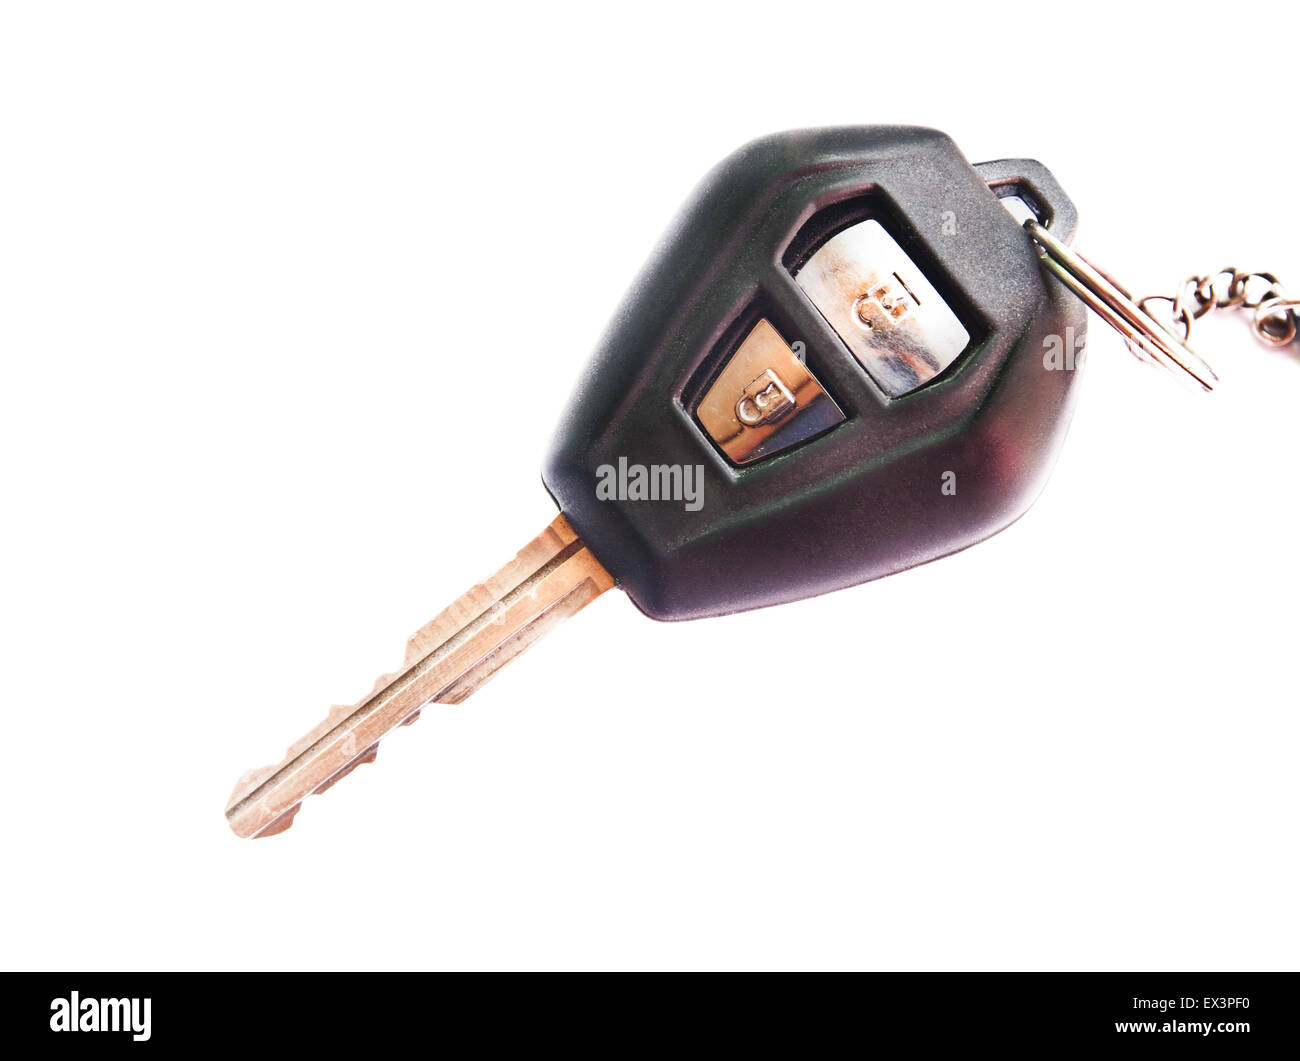 Key of car, Object isolated on a white background Stock Photo